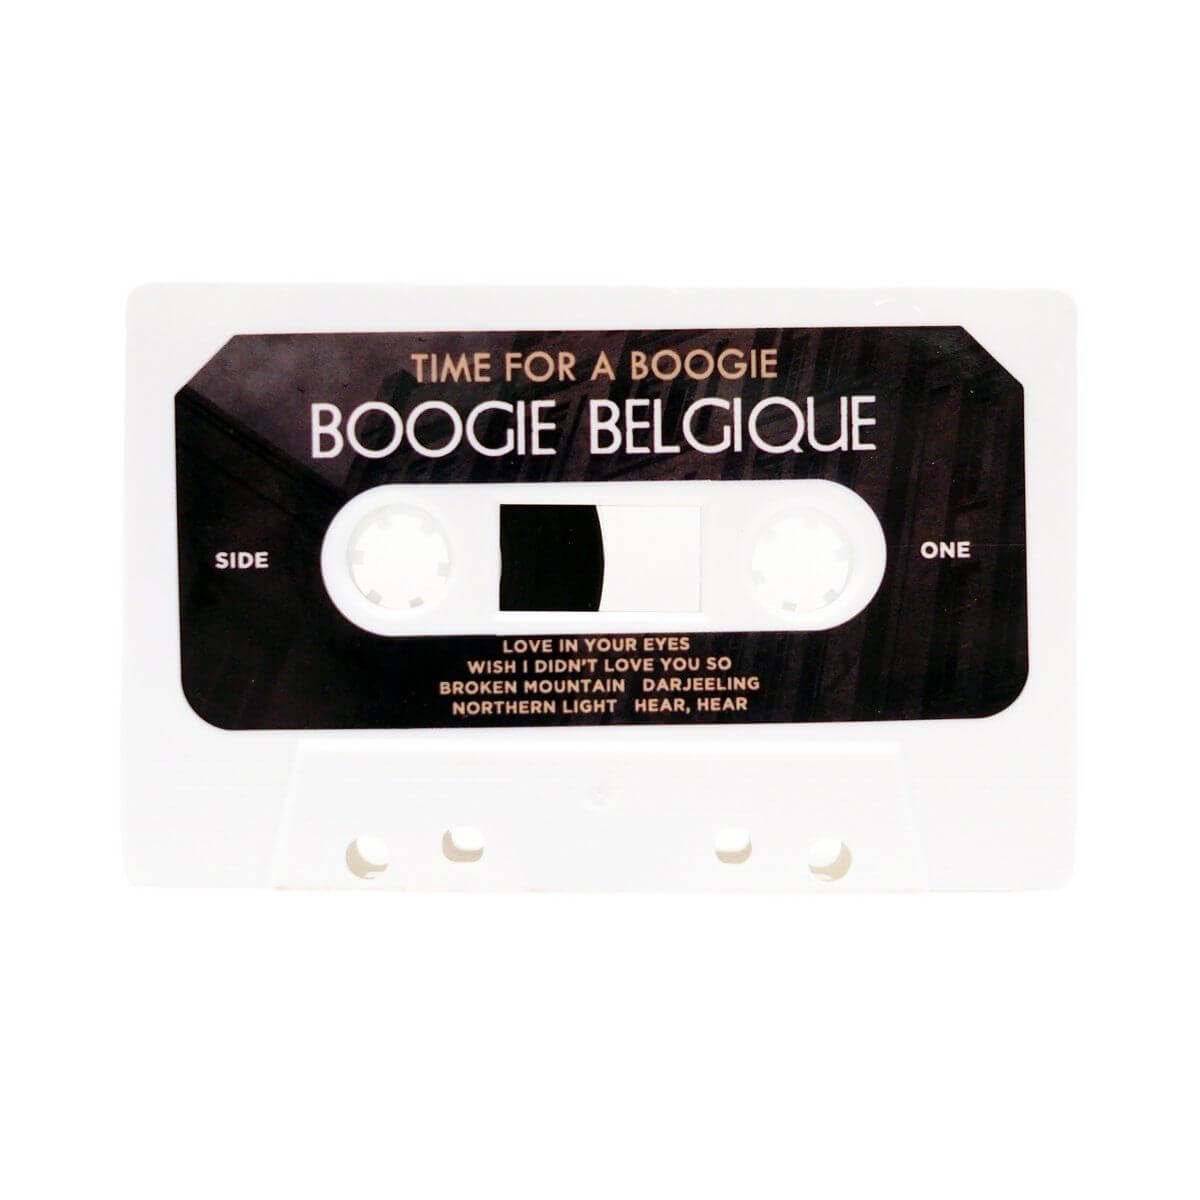 Boogie Belgique - Time For A Boogie (Remastered) - Limited Edition Cassette - Cold Busted